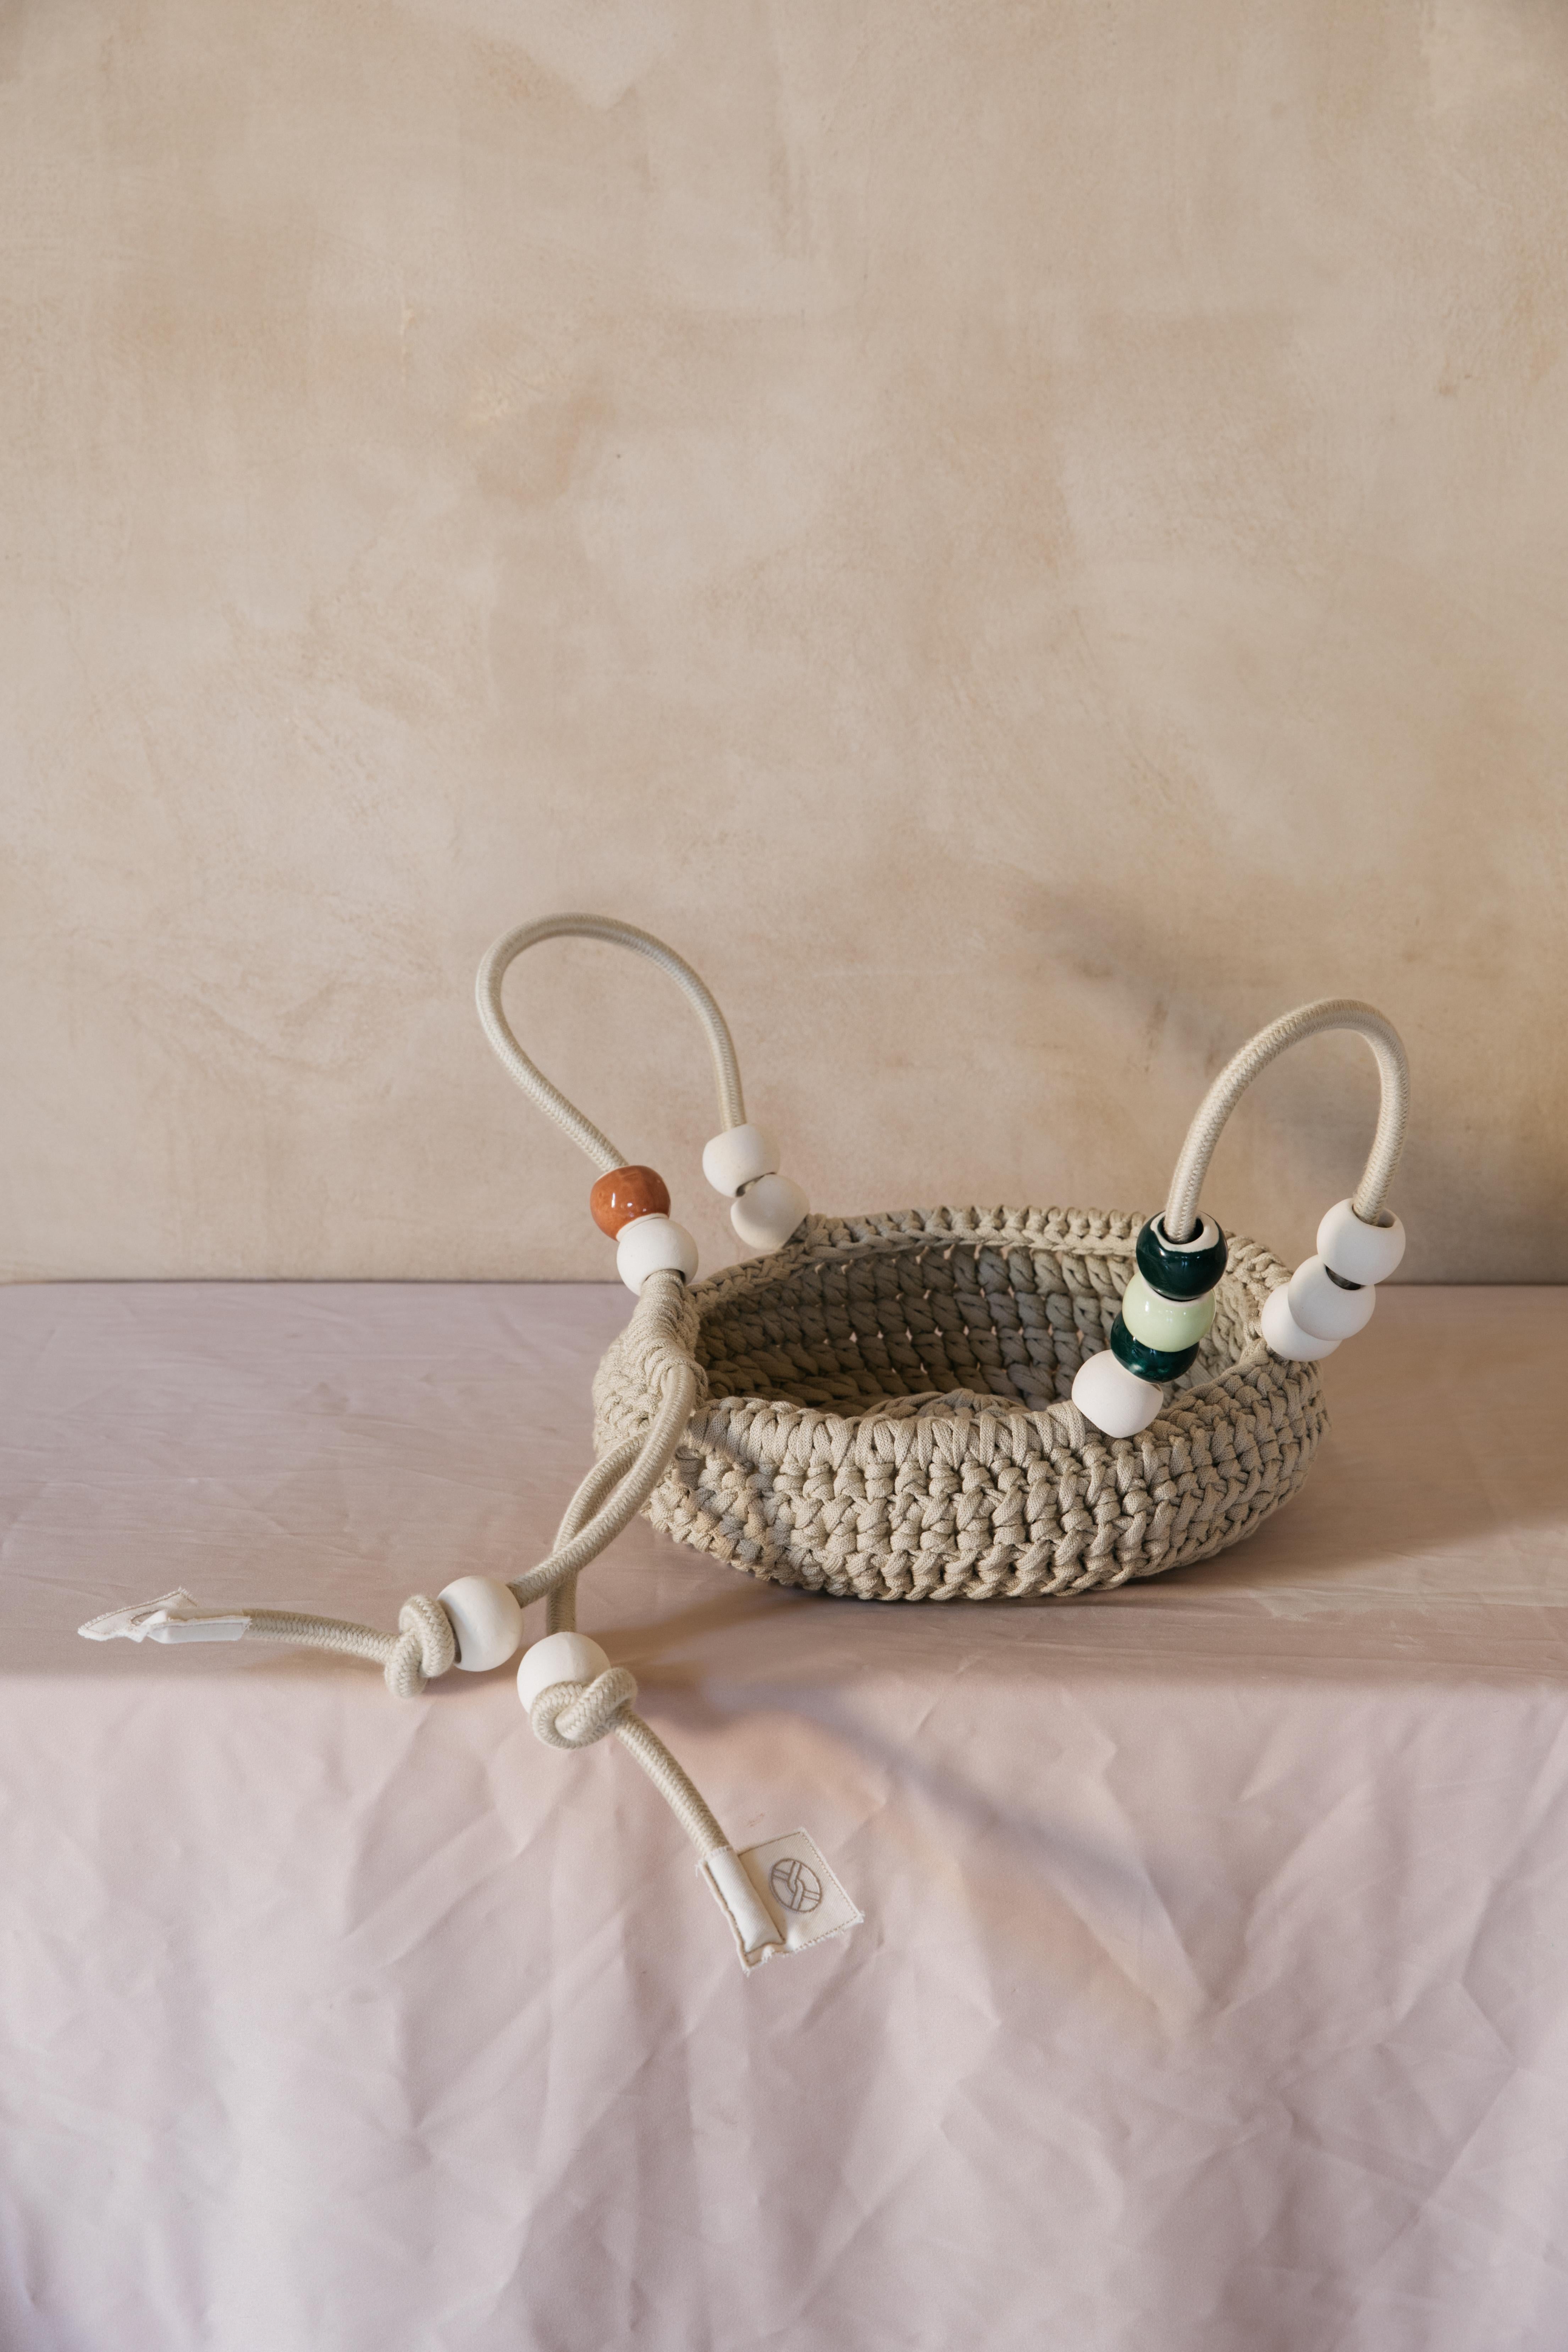 Iota X Abs Objects - Large basket

Crochet basket with rope handle and stoneware beads.
Our collaboration was born early March 2020. While trying to figure out life in the shade of Covid-19, our thoughts wandered out to picnics moments, traveling